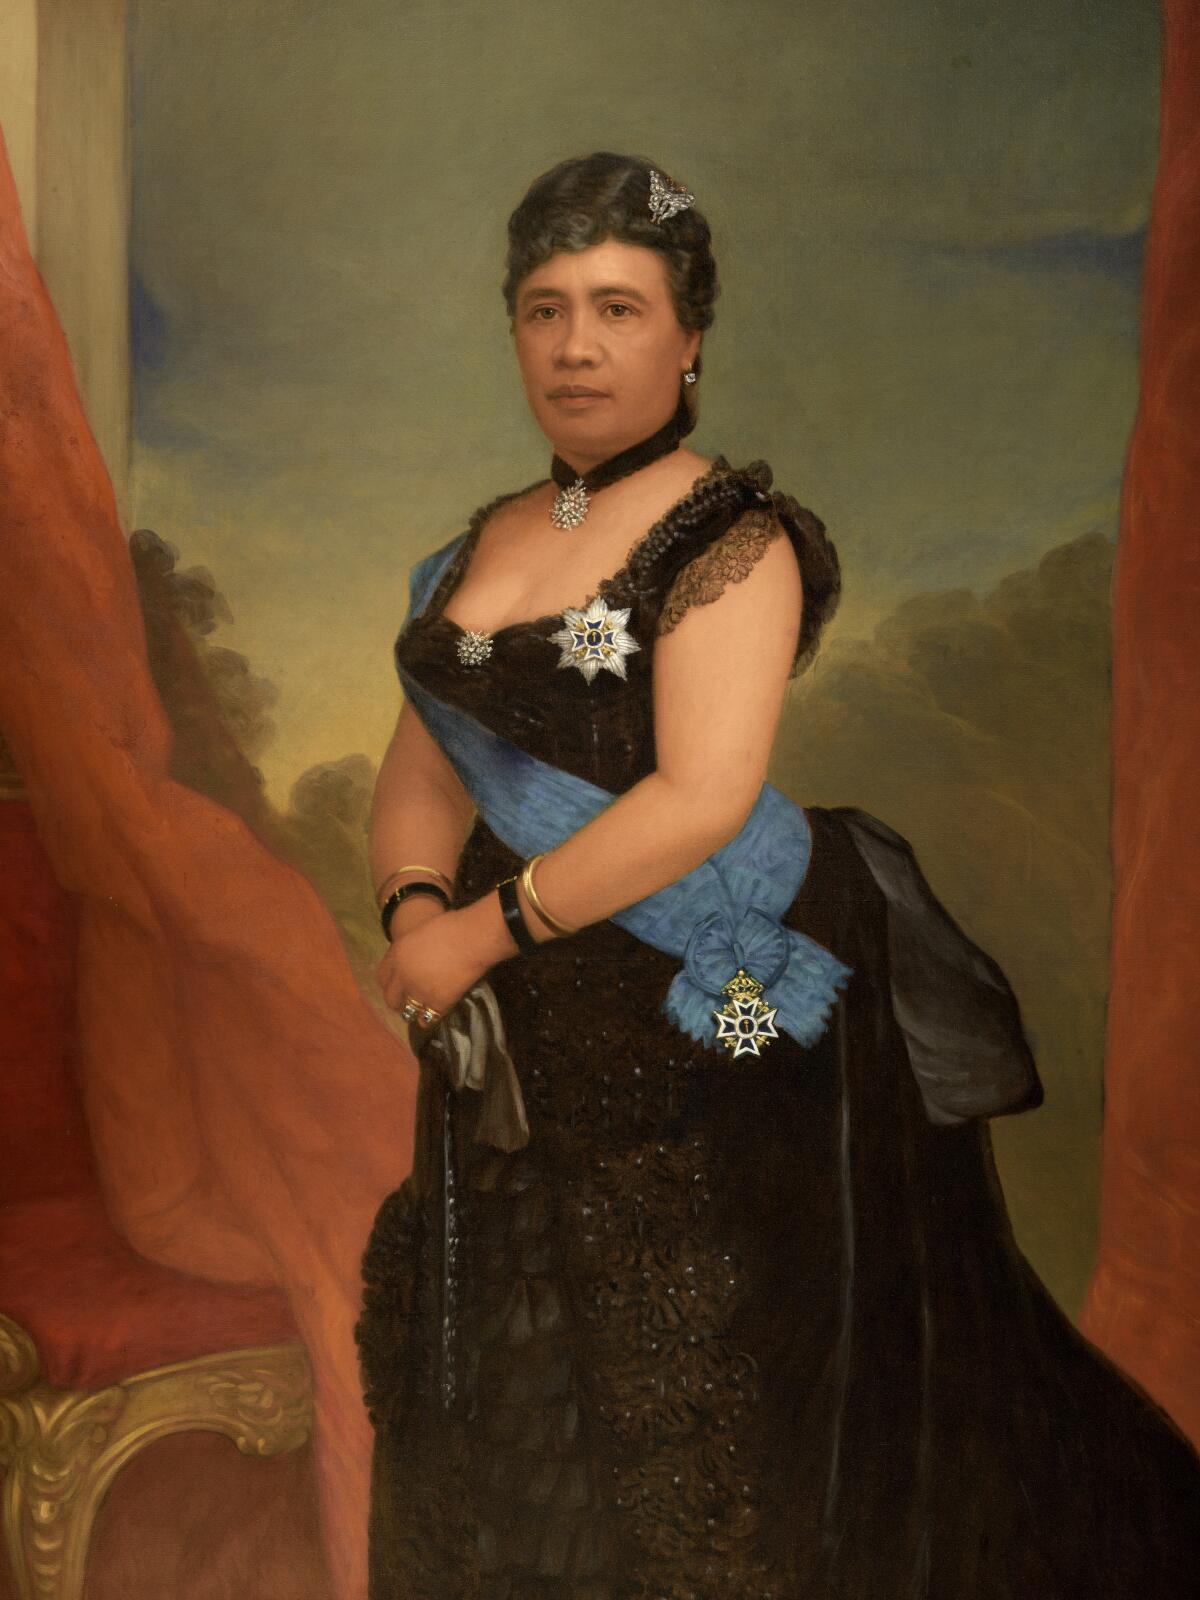 Queen Lili`uokalani, a native Hawaiian, wears a regal black Western dress with a sash in a painted 19th century portrait